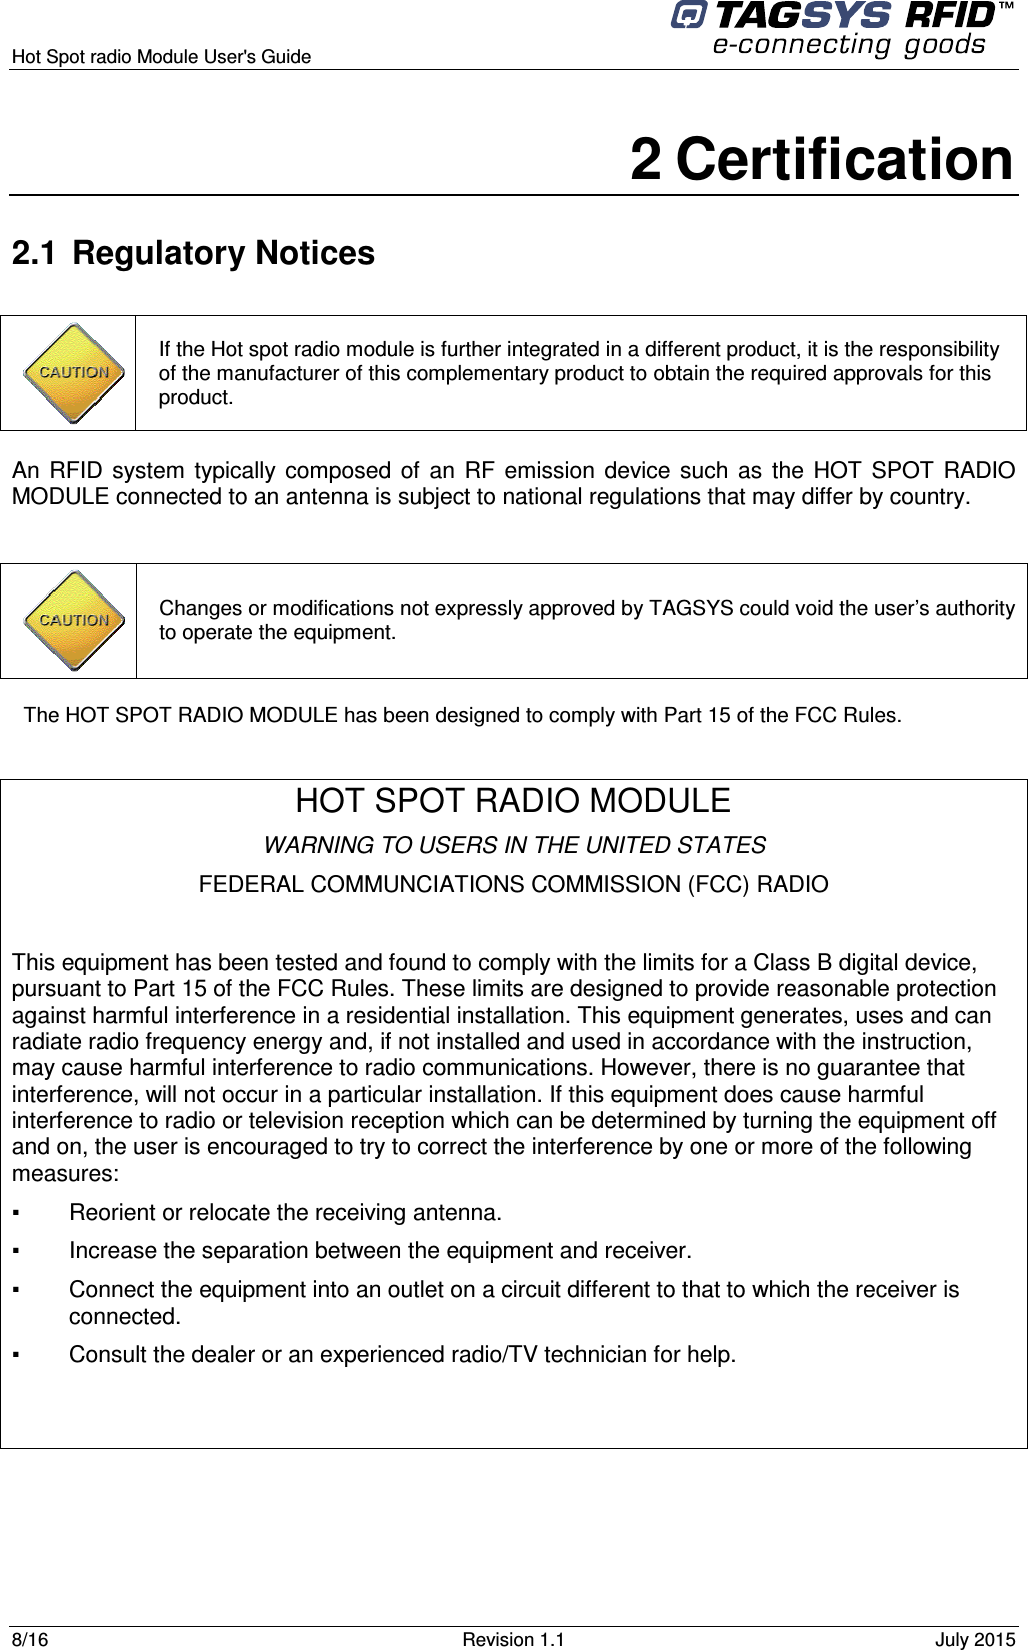  Hot Spot radio Module User&apos;s Guide     8/16  Revision 1.1  July 2015  2 Certification 2.1  Regulatory Notices An  RFID  system  typically  composed  of  an  RF  emission  device such  as  the  HOT  SPOT  RADIO MODULE connected to an antenna is subject to national regulations that may differ by country.  The HOT SPOT RADIO MODULE has been designed to comply with Part 15 of the FCC Rules.  HOT SPOT RADIO MODULE WARNING TO USERS IN THE UNITED STATES FEDERAL COMMUNCIATIONS COMMISSION (FCC) RADIO  This equipment has been tested and found to comply with the limits for a Class B digital device, pursuant to Part 15 of the FCC Rules. These limits are designed to provide reasonable protection against harmful interference in a residential installation. This equipment generates, uses and can radiate radio frequency energy and, if not installed and used in accordance with the instruction, may cause harmful interference to radio communications. However, there is no guarantee that interference, will not occur in a particular installation. If this equipment does cause harmful interference to radio or television reception which can be determined by turning the equipment off and on, the user is encouraged to try to correct the interference by one or more of the following measures:  ▪   Reorient or relocate the receiving antenna. ▪   Increase the separation between the equipment and receiver. ▪   Connect the equipment into an outlet on a circuit different to that to which the receiver is connected. ▪   Consult the dealer or an experienced radio/TV technician for help.    Changes or modifications not expressly approved by TAGSYS could void the user’s authority to operate the equipment.  If the Hot spot radio module is further integrated in a different product, it is the responsibility of the manufacturer of this complementary product to obtain the required approvals for this product. 